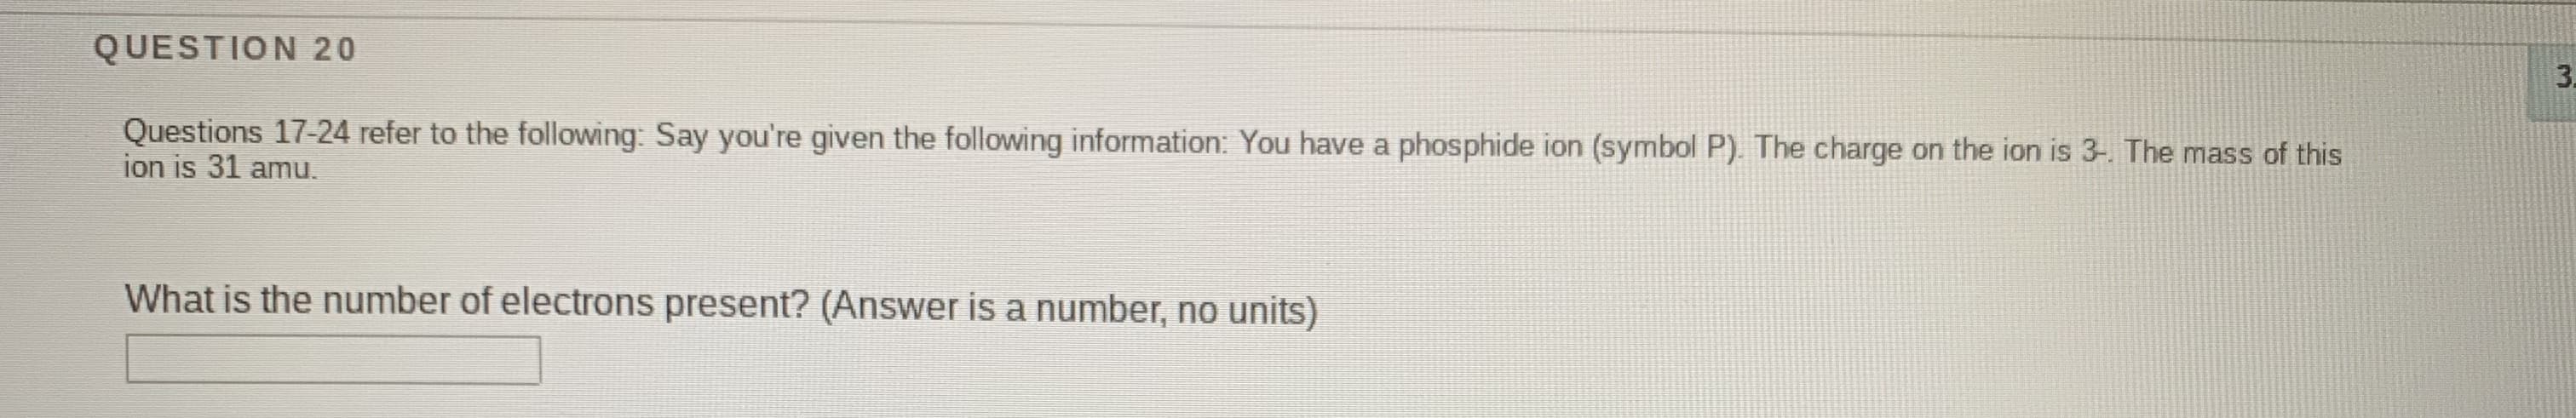 Questions 17-24 refer to the following: Say you're given the following information: You have a phosphide ion (symbol P). The charge on the ion is 3-. The mass of this
ion is 31 amu.
What is the number of electrons present? (Answer is a number, no units)
